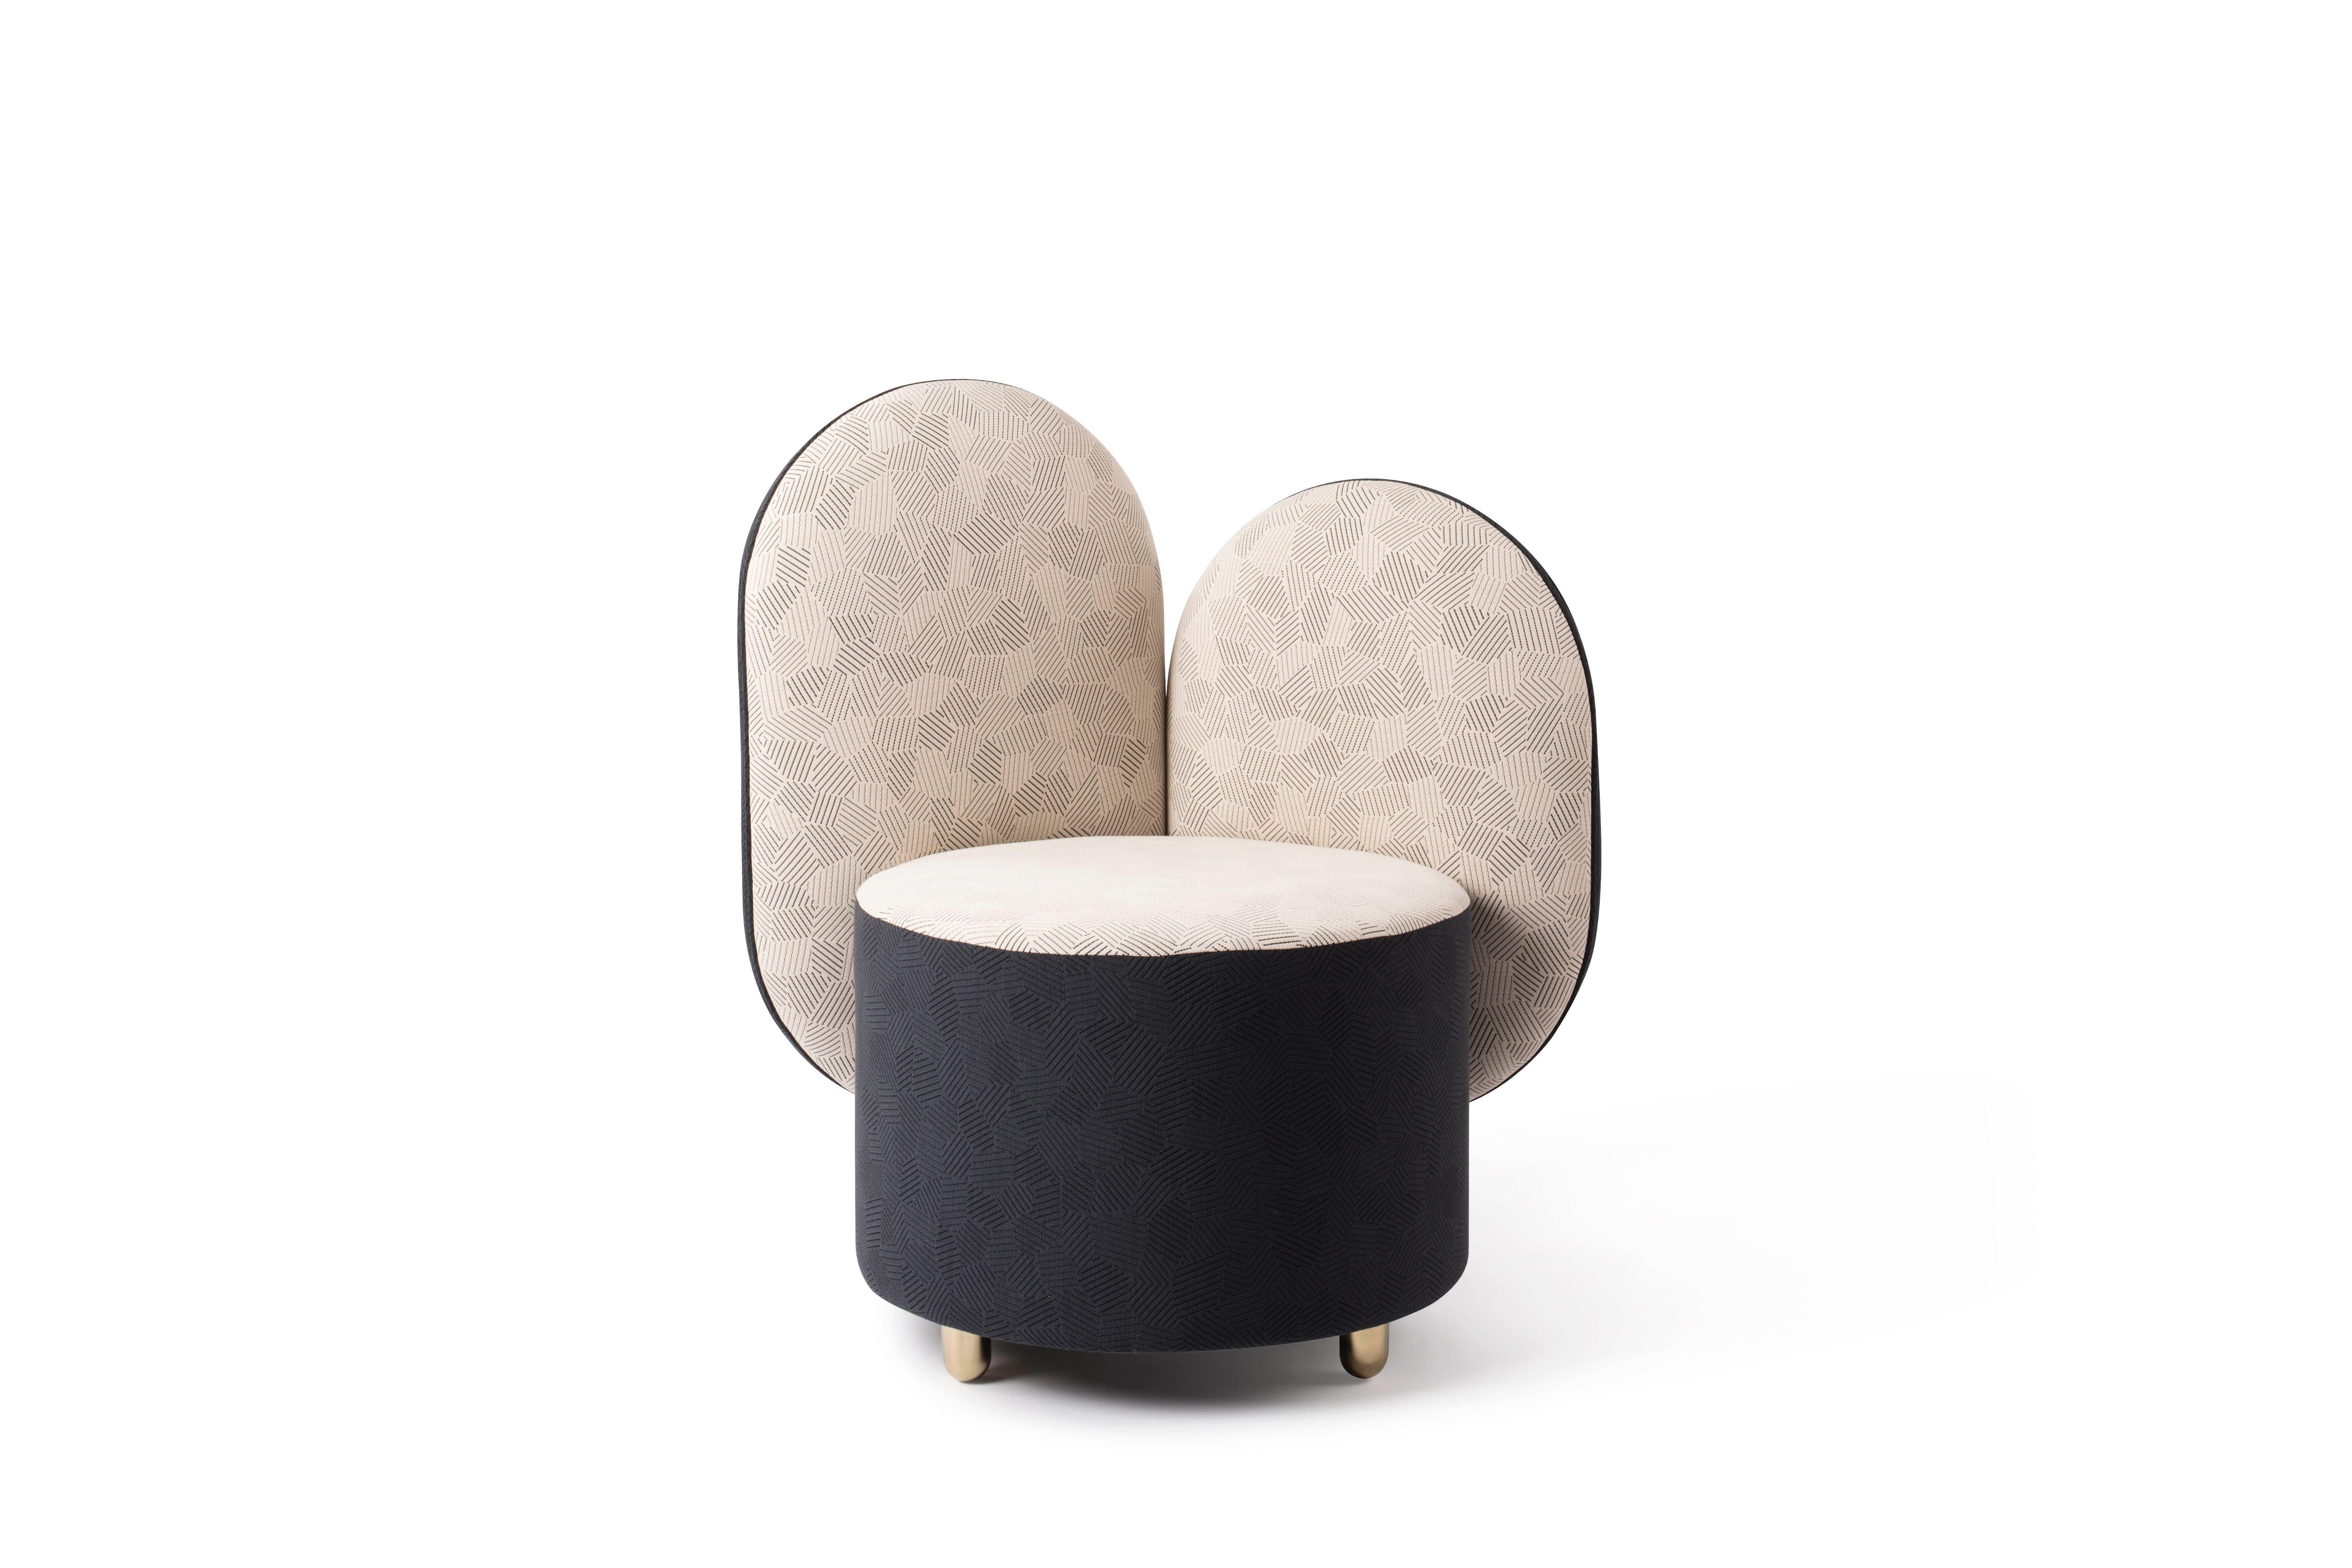 Half half designed by Thomas Dariel, Maison Dada
Measures: W 83 x D 66 x H 90cm
Structure in solid timber and plywood • Memory foam
Base and seating fully upholstered in fabric
Feet in plated metal • glossy Champagne color finish
Recommended